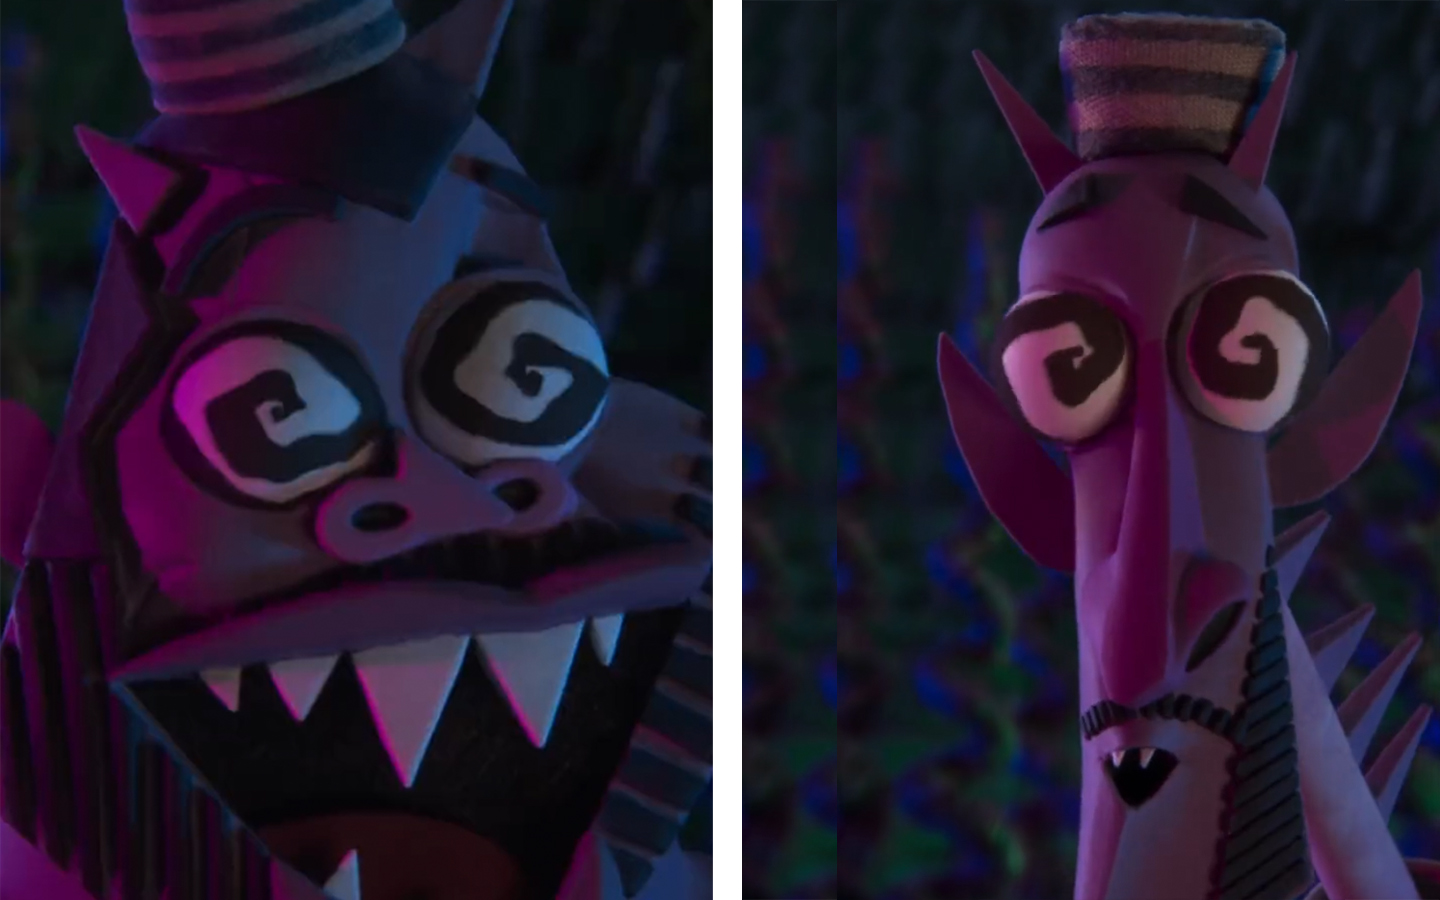 A Nightmare Before Christmas' Creator's 'Wendell & Wild' Gets a New Teaser Featuring Jordan Peele